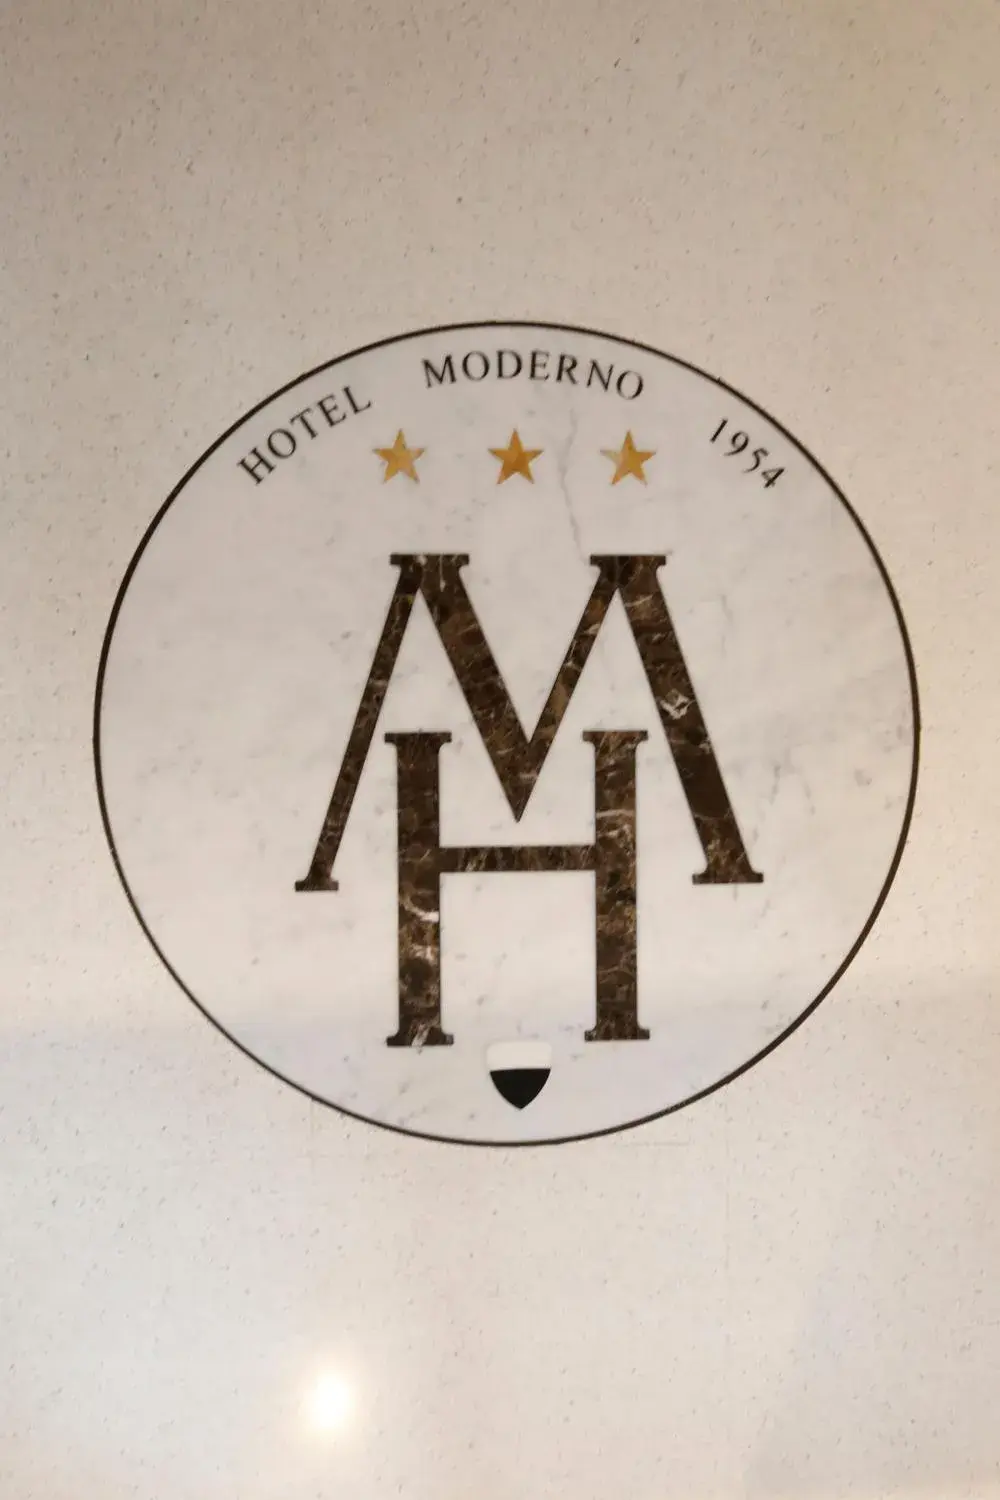 Property logo or sign in Hotel Moderno